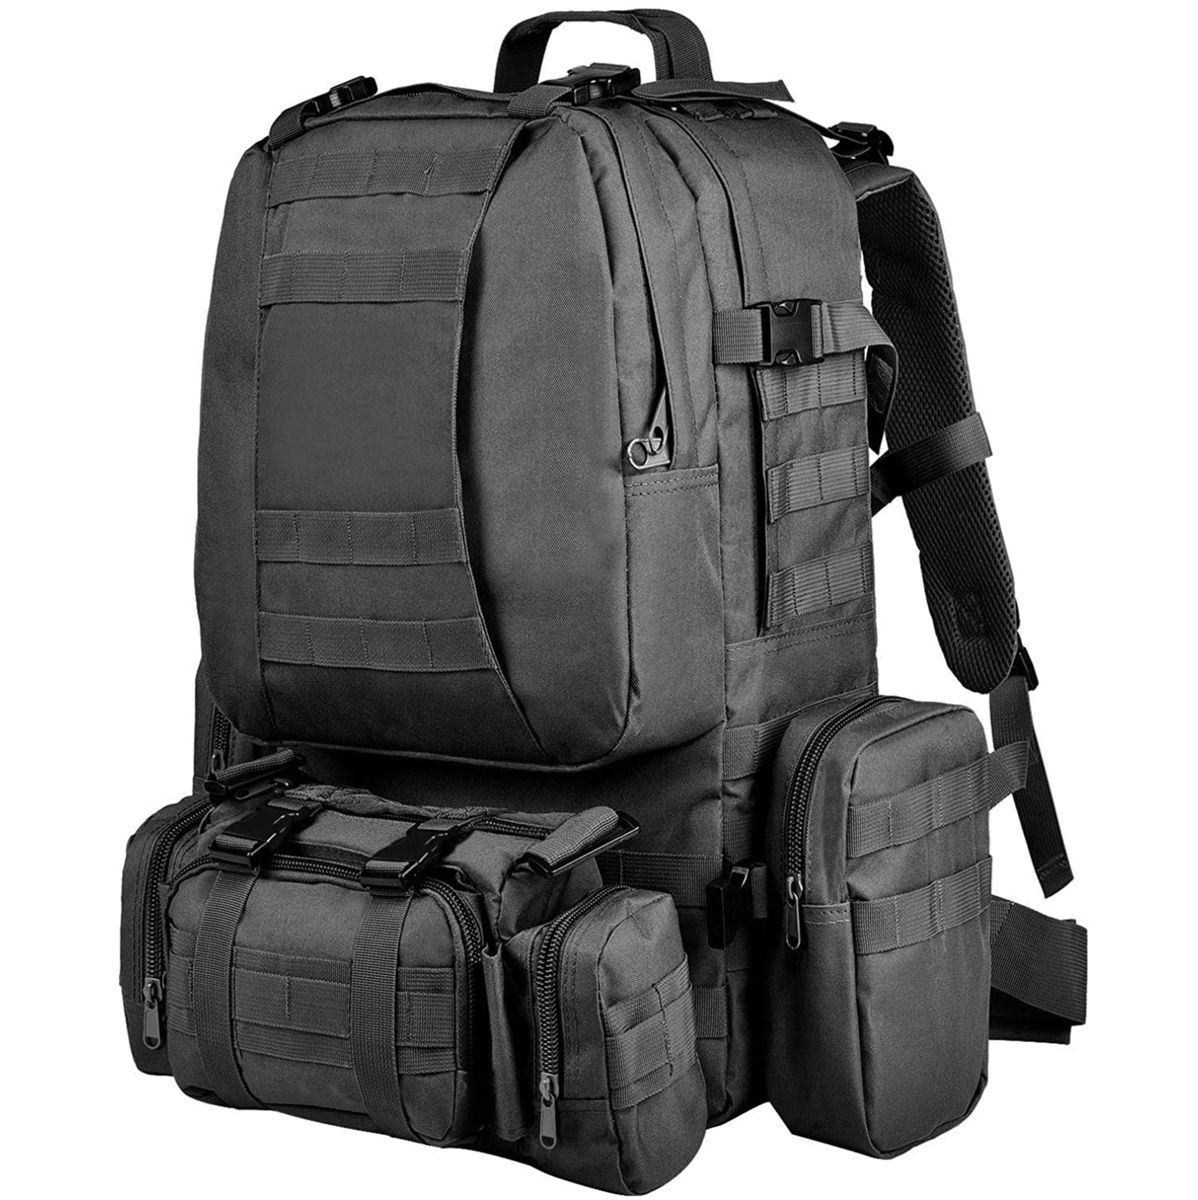 Tactical Military Backpack - 3 Molle Bags - Black | Shop Today. Get it ...